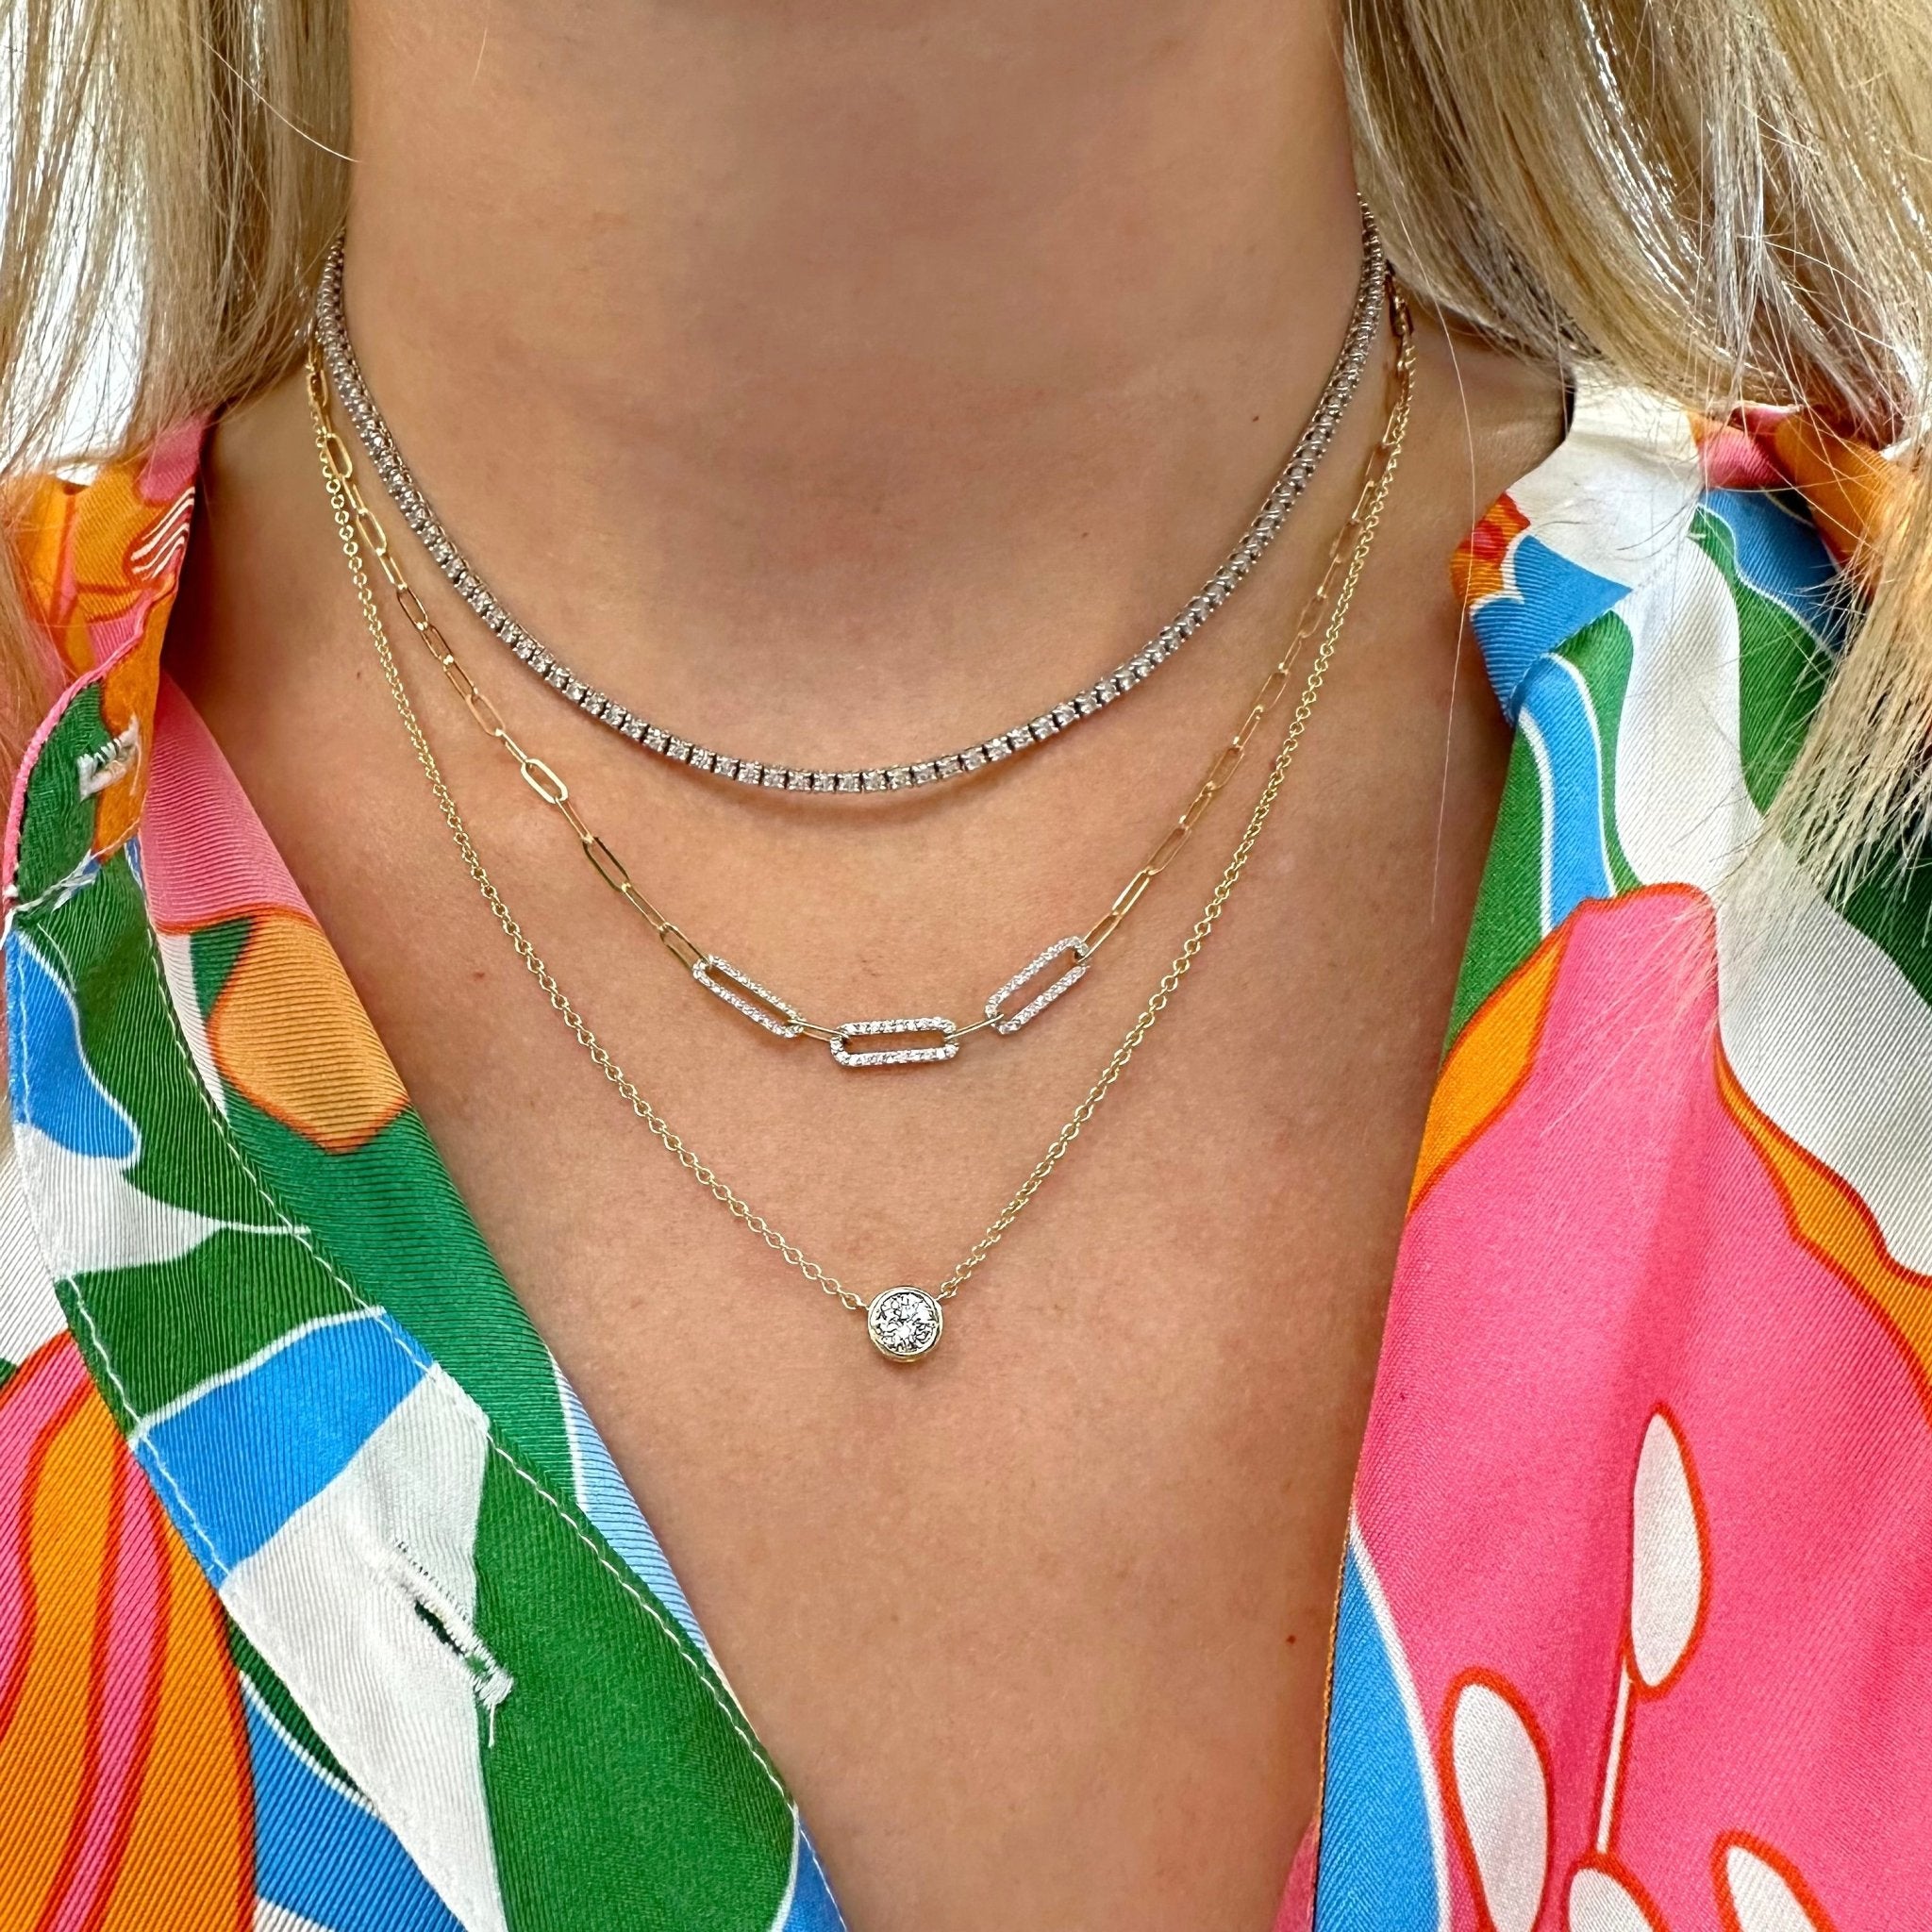 Diamond Paperclip Chain Necklace in White Gold - JusticeJewelers